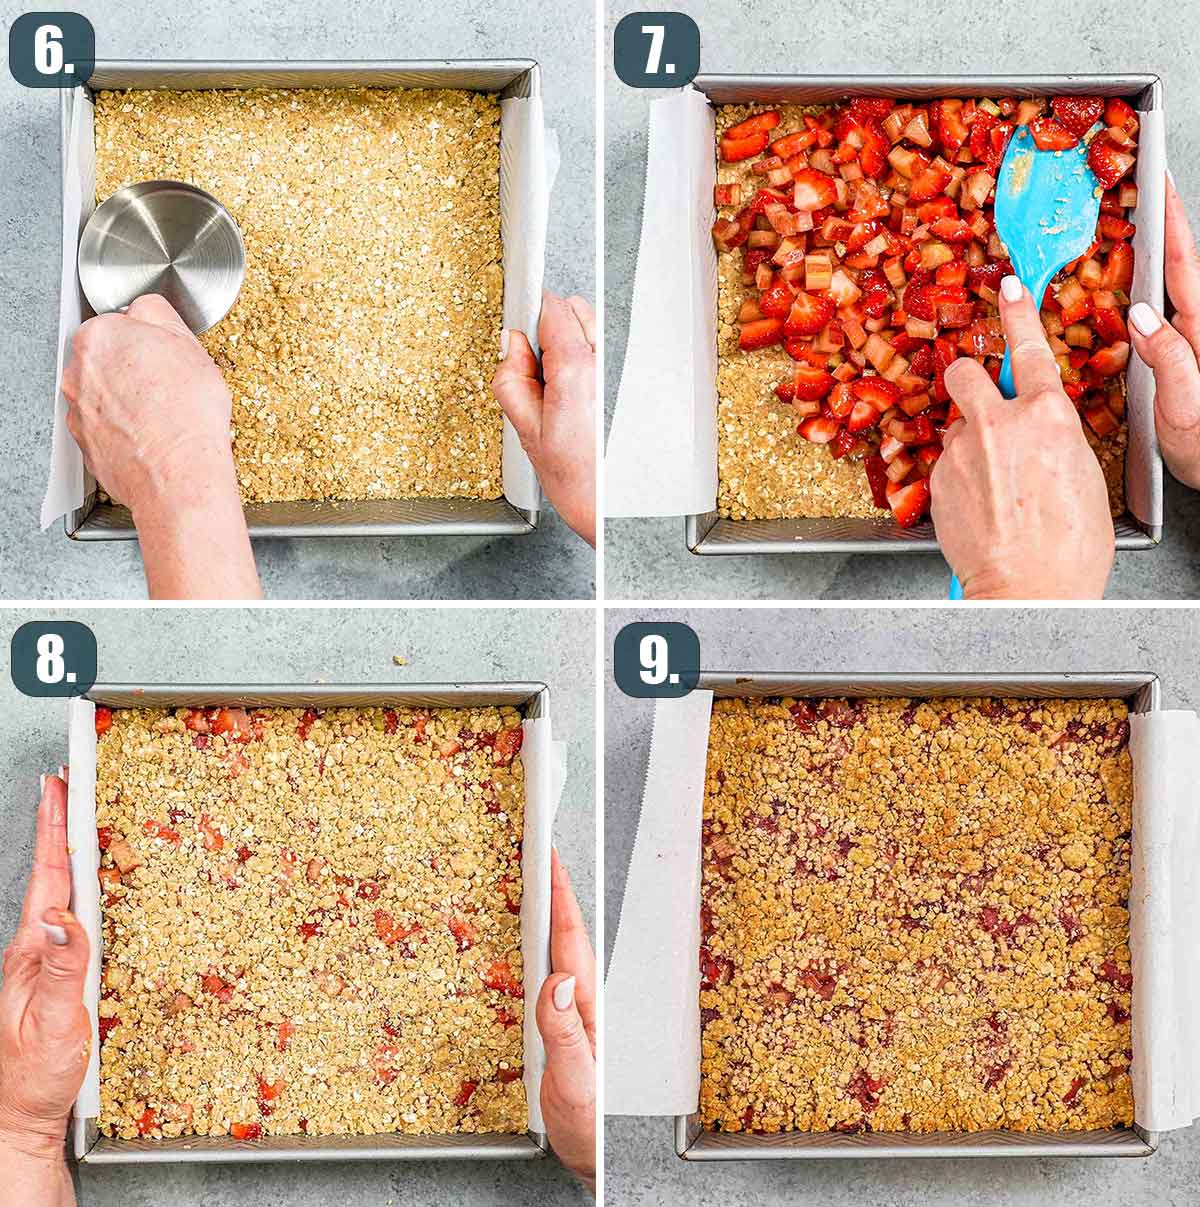 process shots showing how to assemble strawberry rhubarb bars.